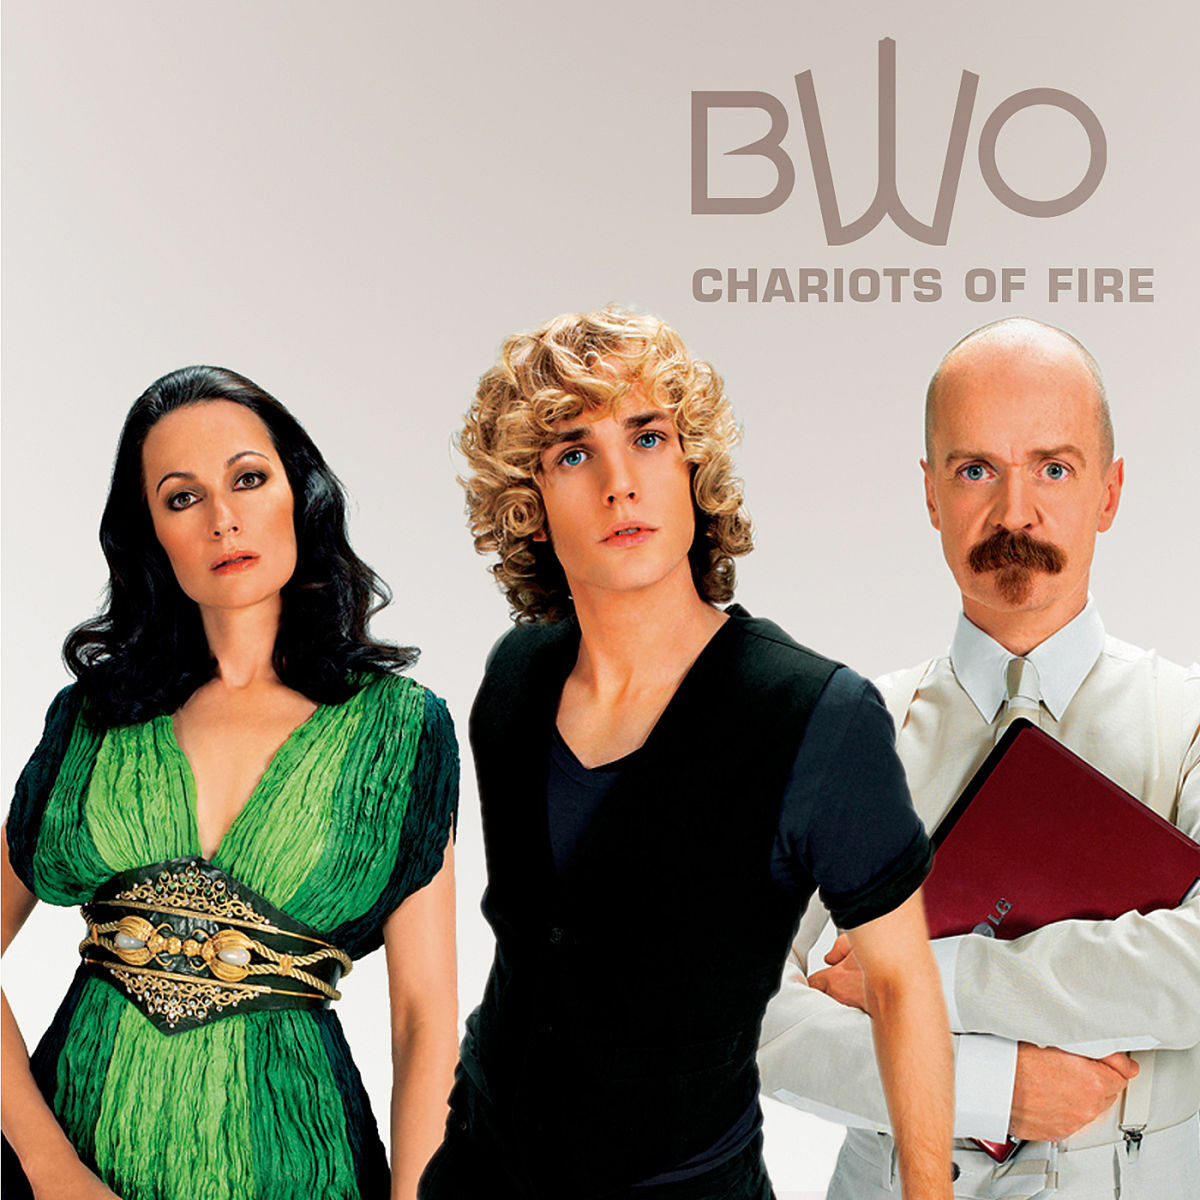 BWO (Bodies Without Organs) Chariots of Fire cover artwork